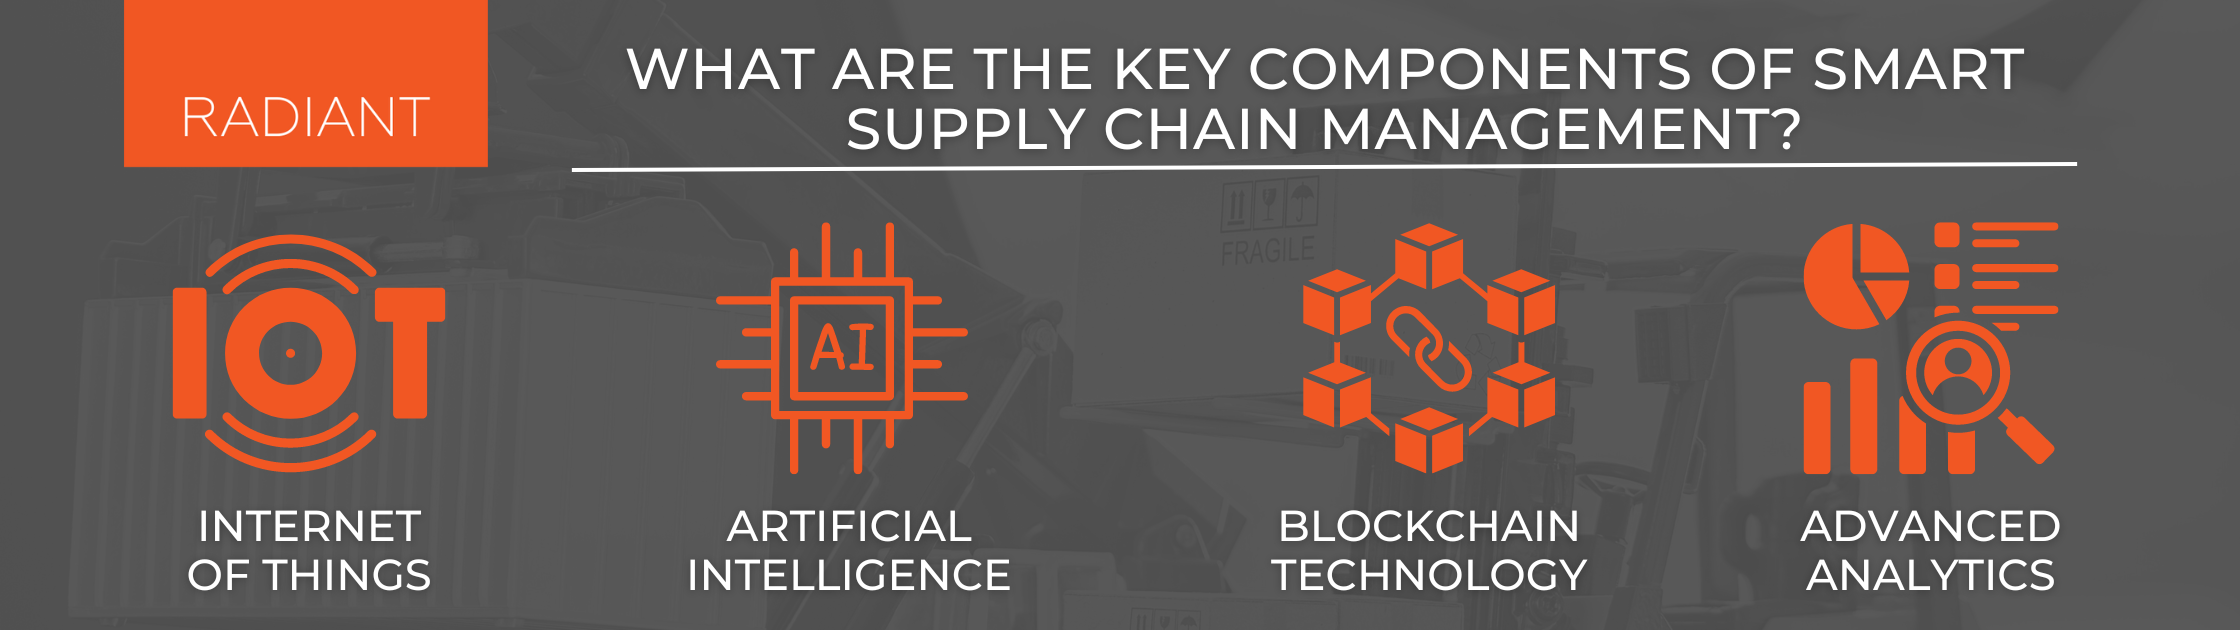 IoT Projects In Supply Chain Management - Industry 4.0 Supply Chain - Intelligent Supply Chain - Intelligent Supply Chain Management - Supply Chain 4.0 - Advanced Supply Chain Management - Internet Of Things In Supply Chain Management - Internet Of Things And Supply Chain Management - Smart Supply Chain - What Is Smart Supply Chain Management - Smart Supply Chain Management